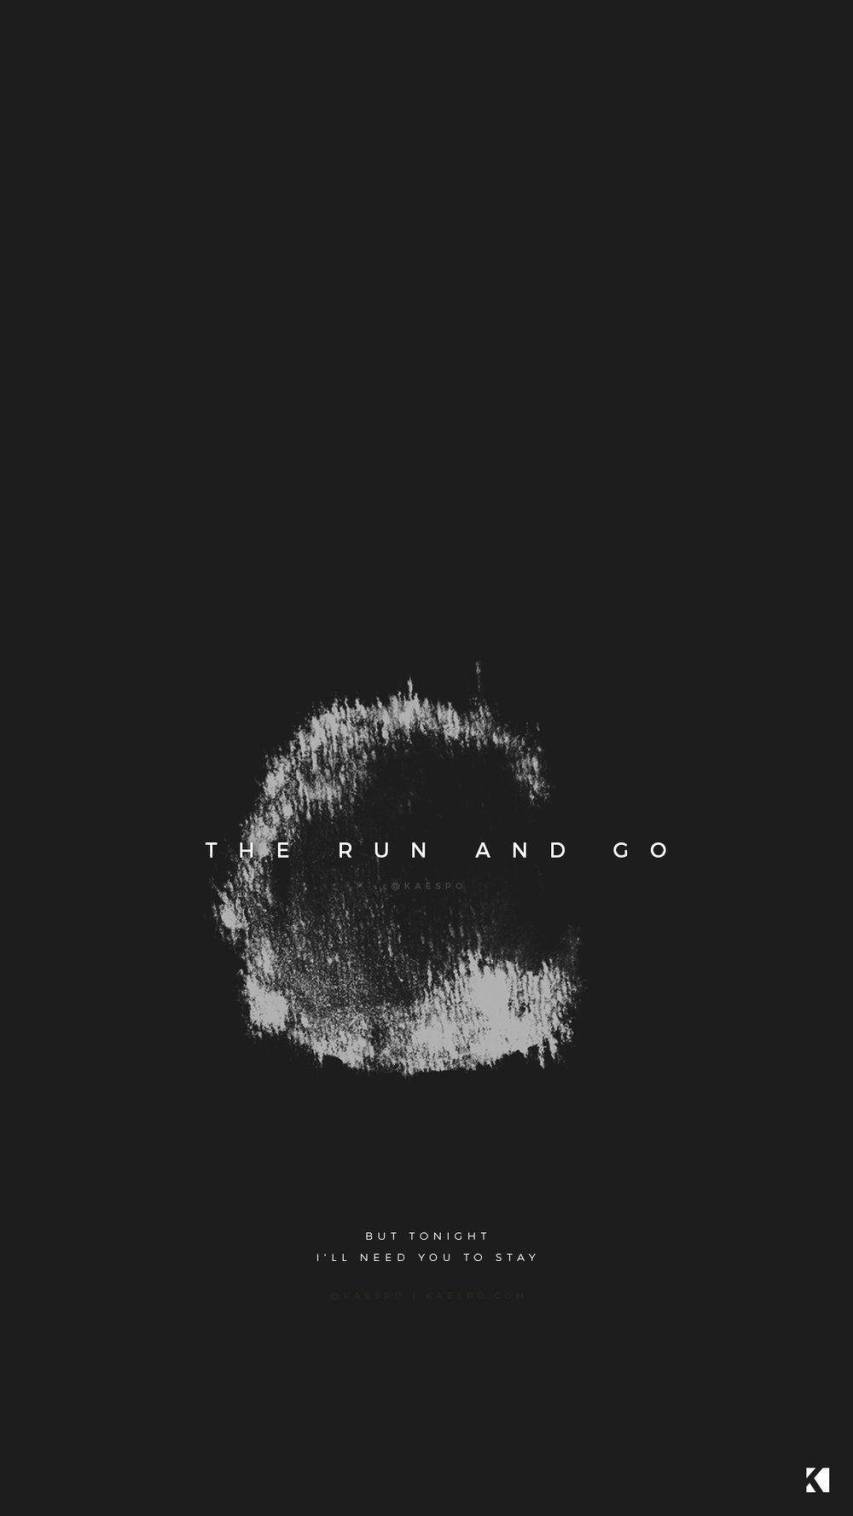 A black and white iPhone wallpaper with the lyrics 